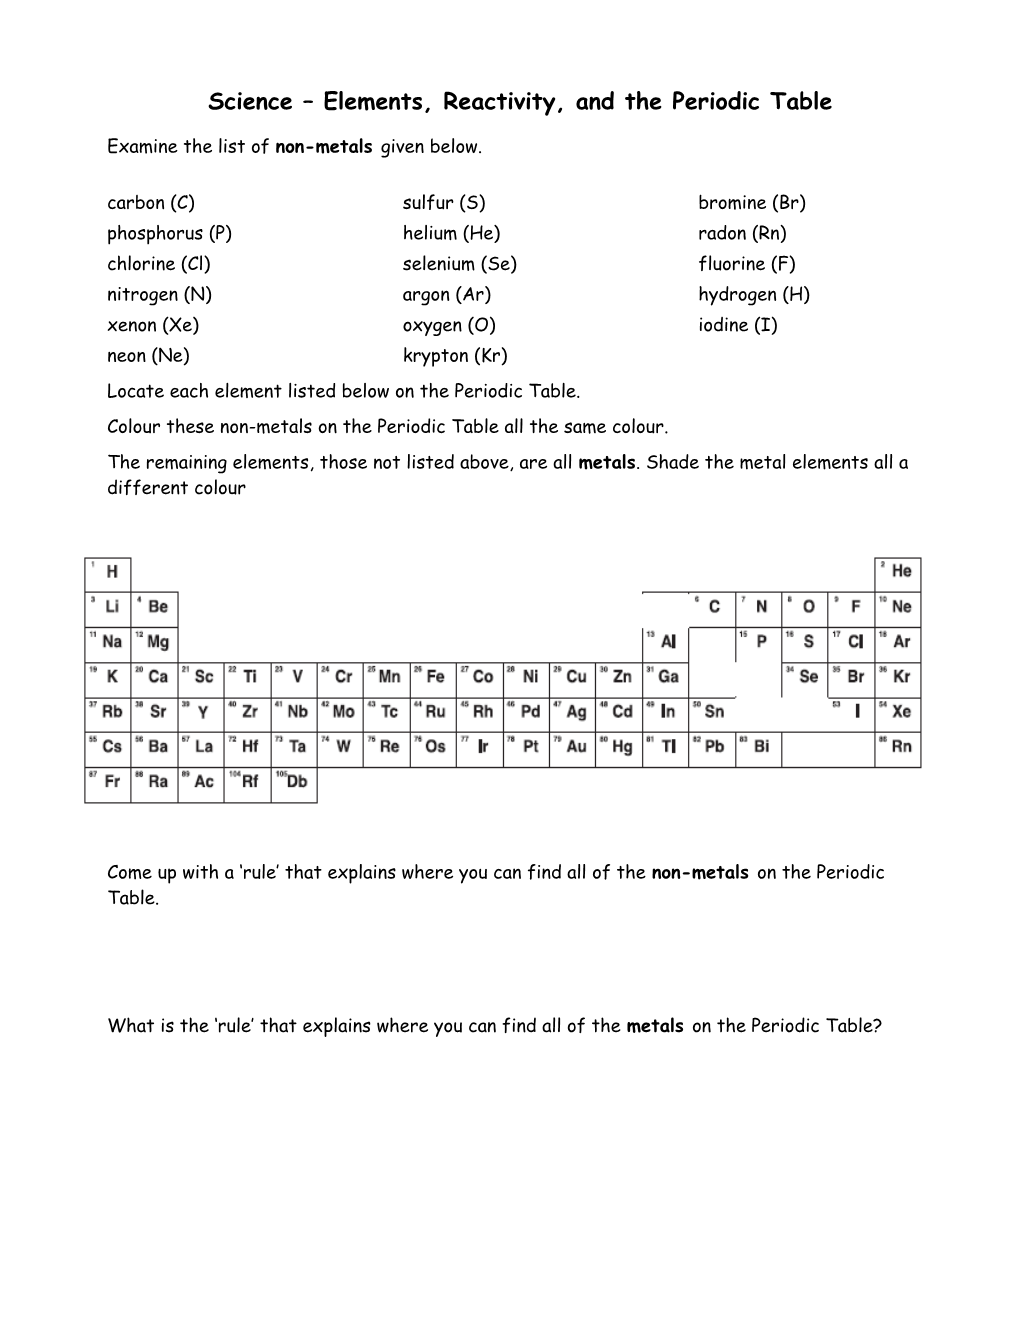 Science Elements, Reacti Vity, and the Periodic Table